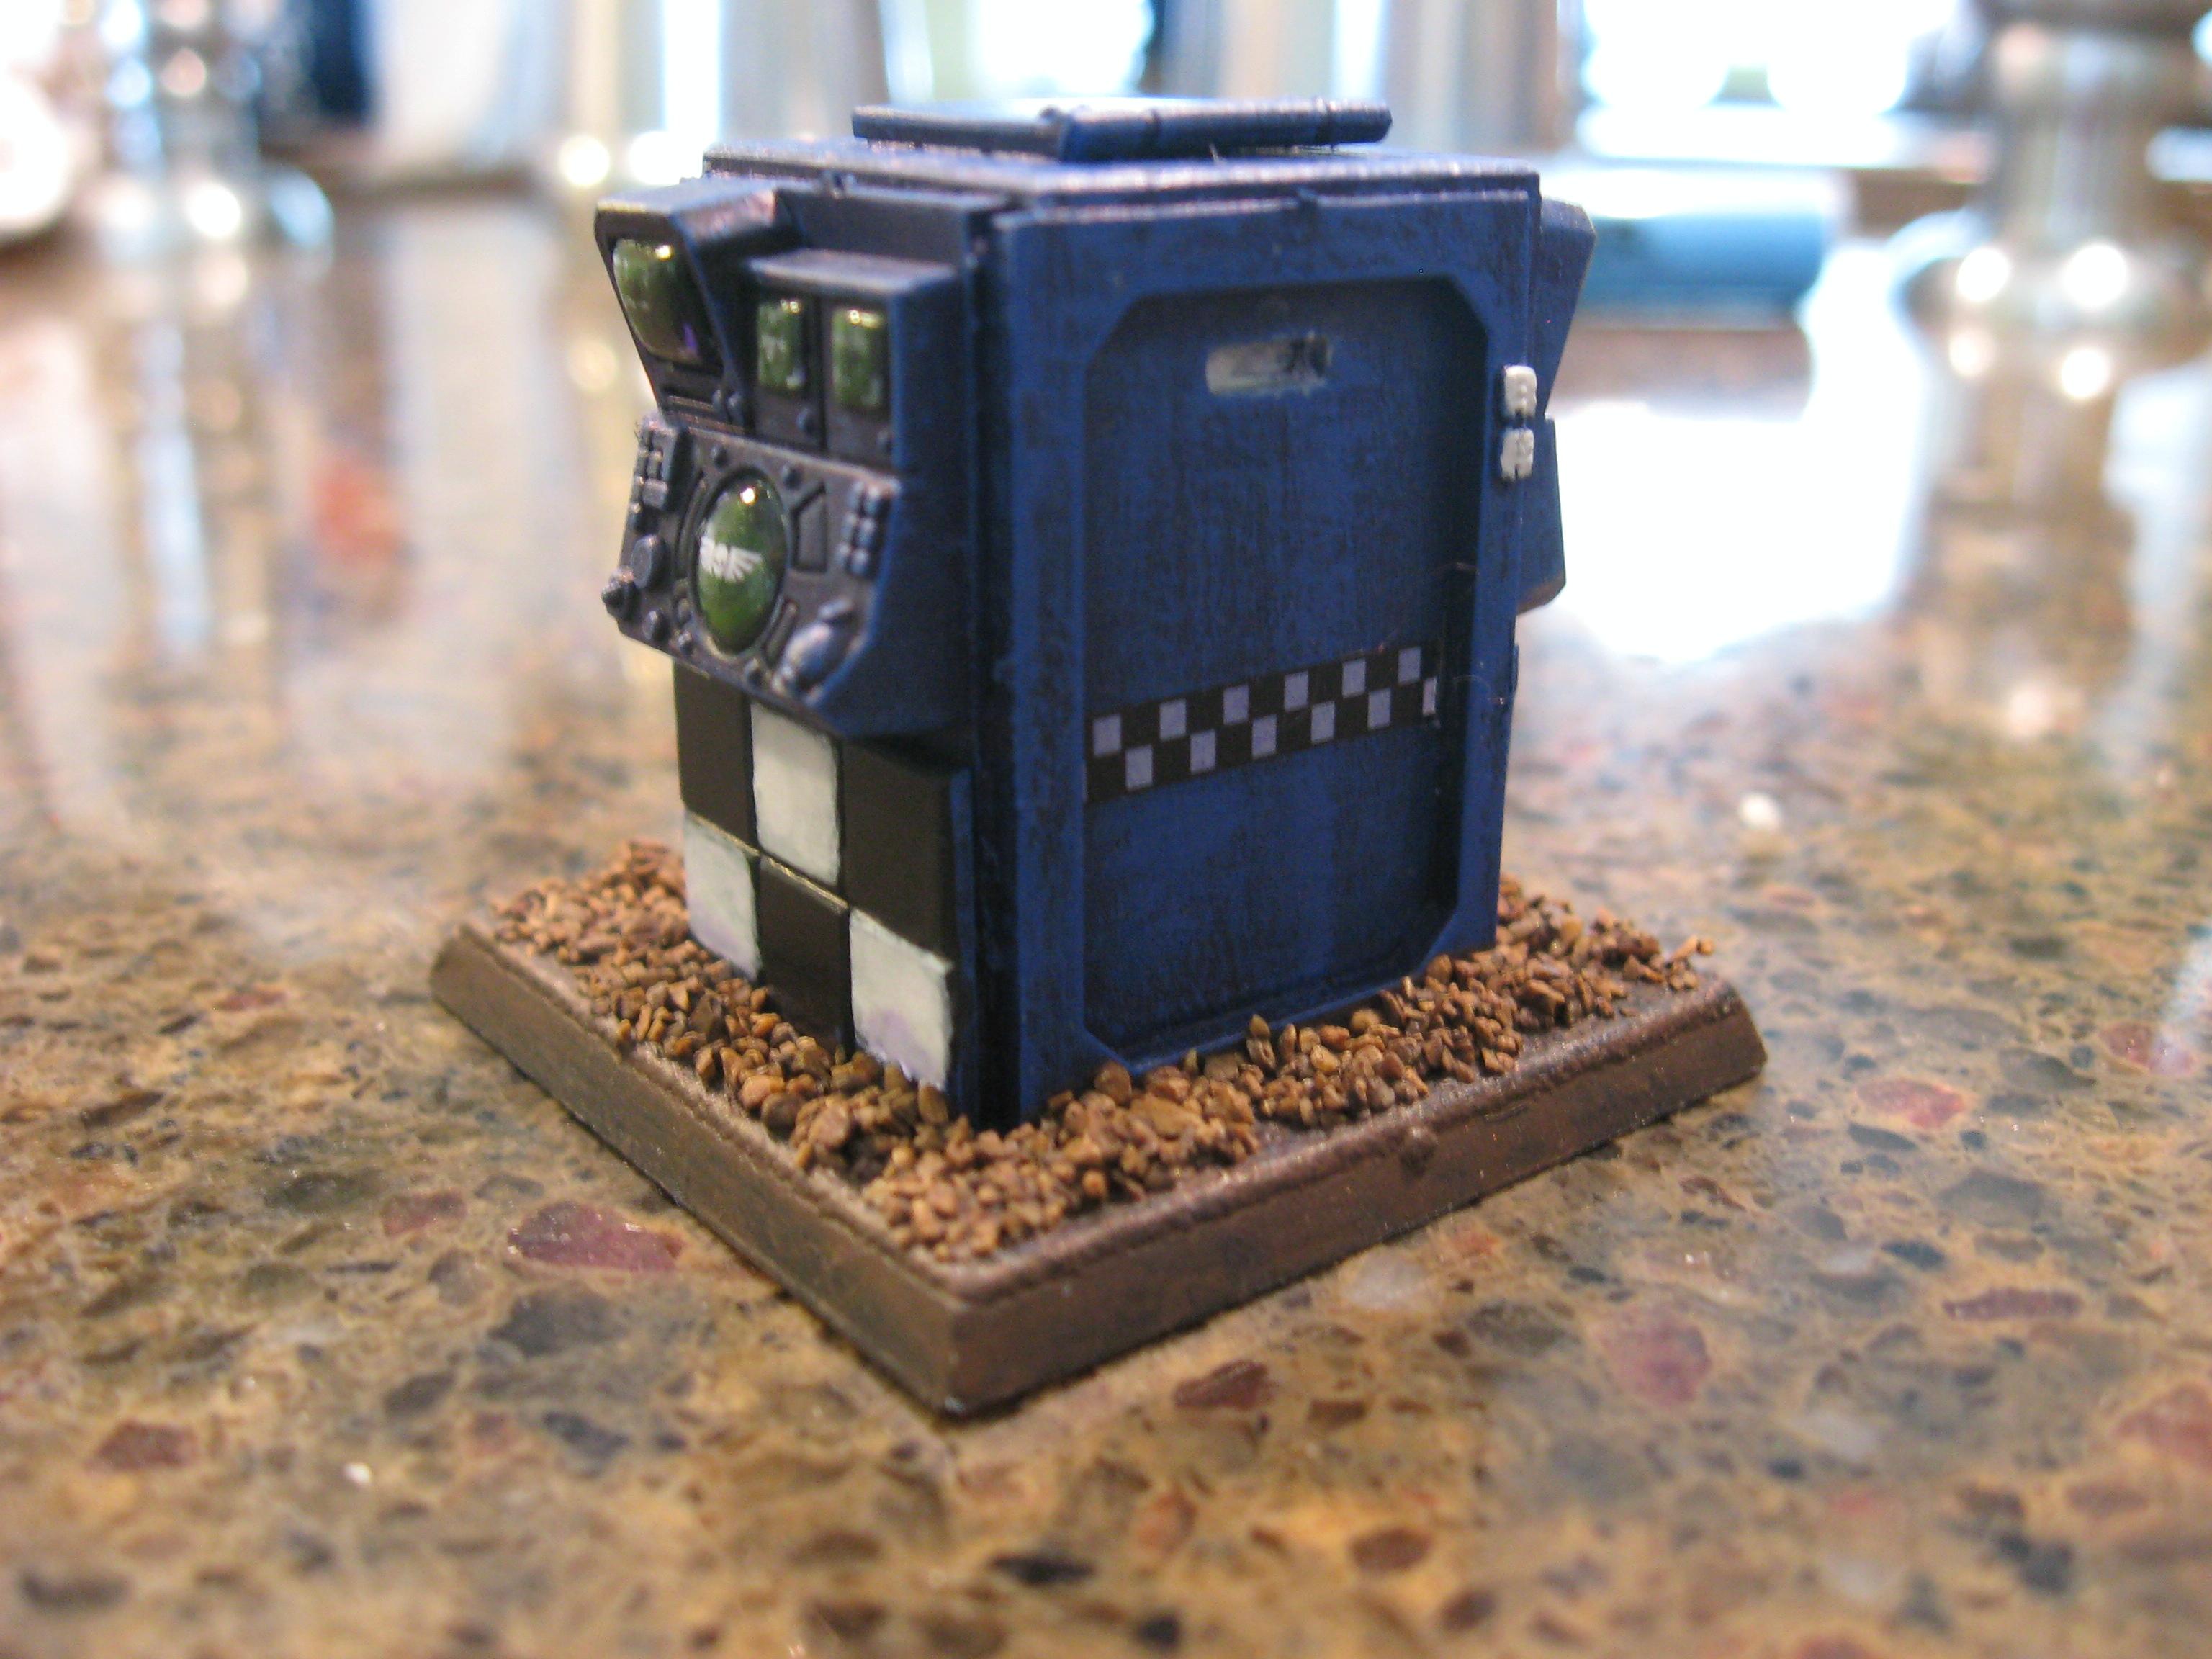 Dr Who, Objective Marker, Warhammer 40,000